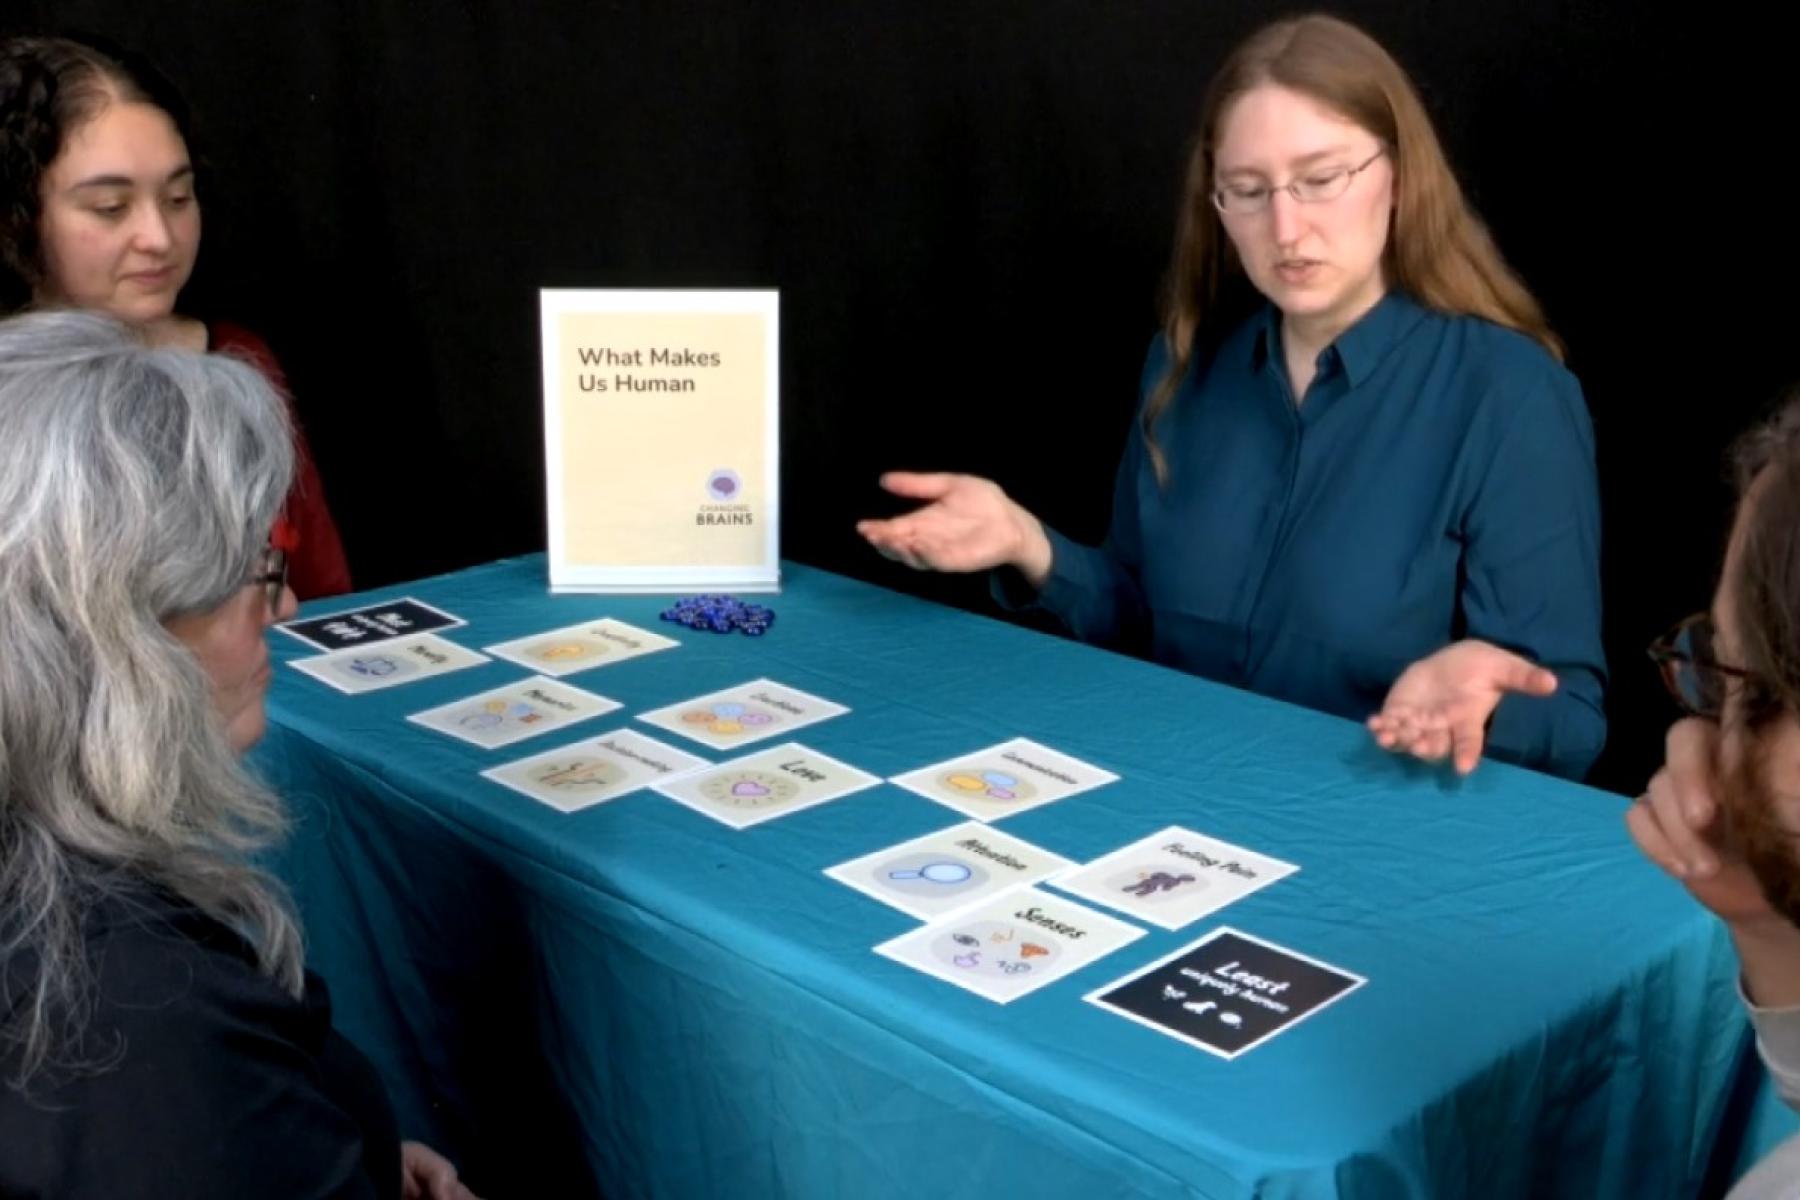 a facilitator gestures to cards on a table while three players look on